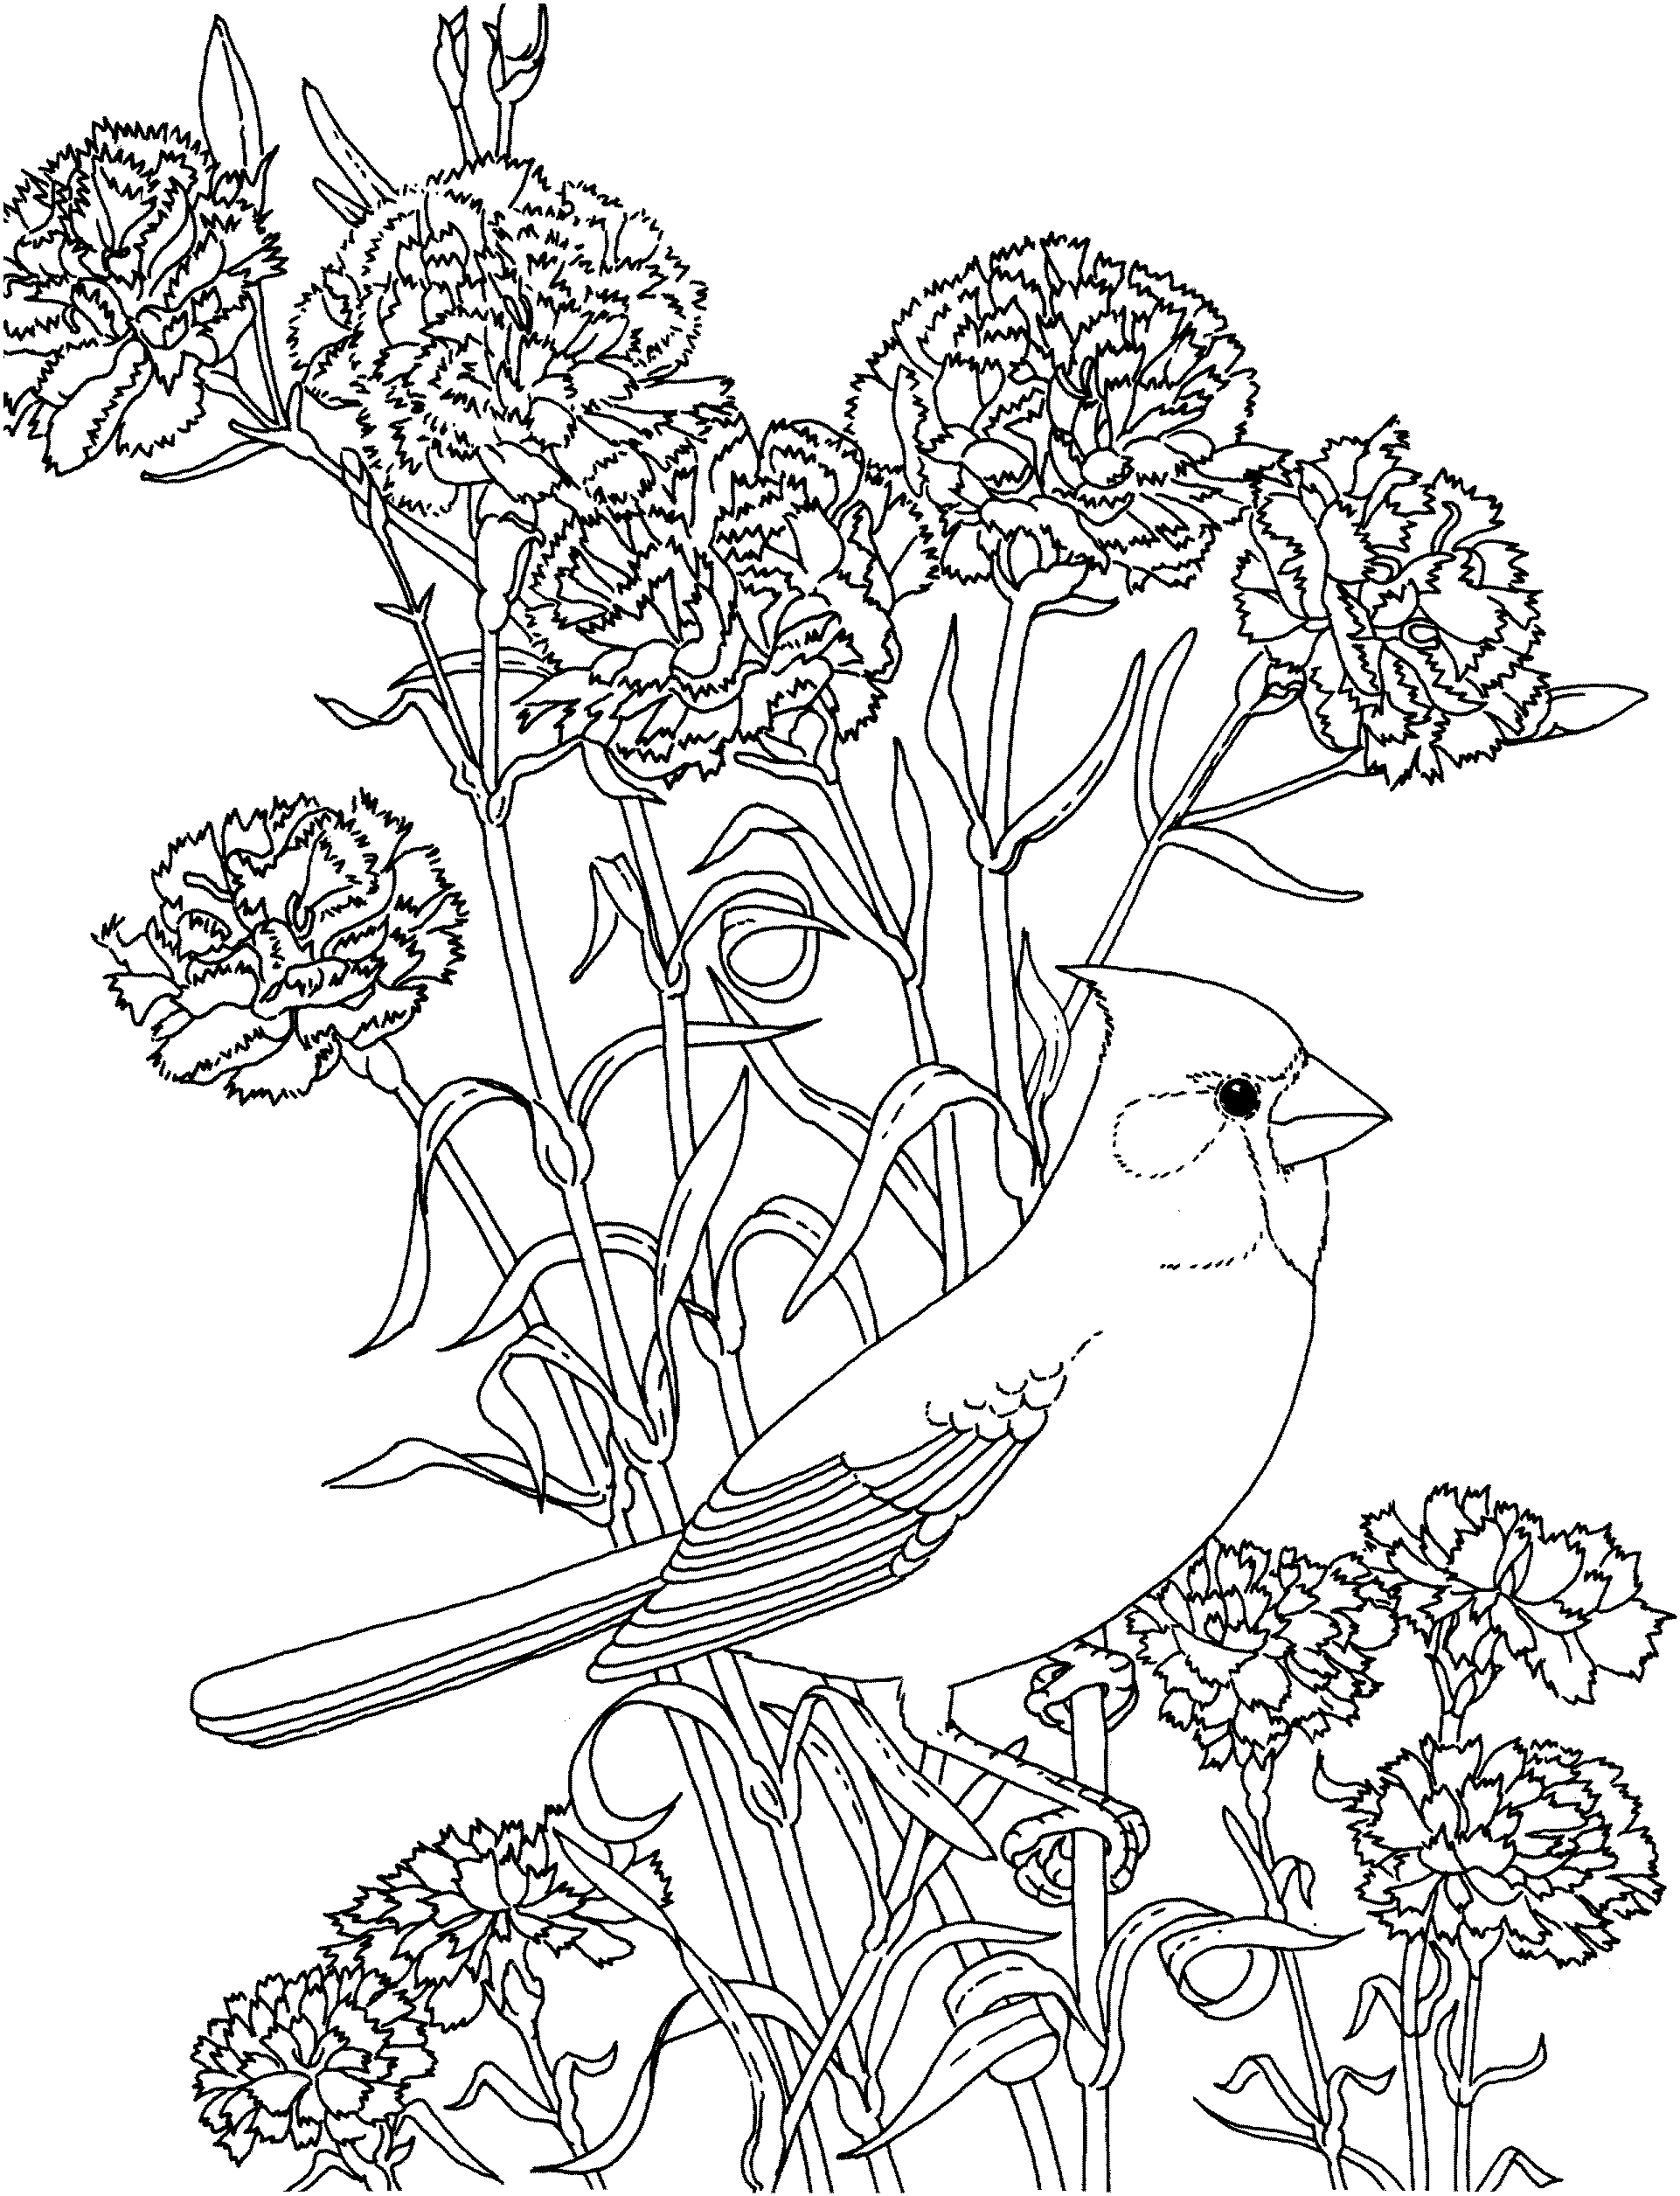 Cardinal coloring page flower coloring pages bird coloring pages coloring pages